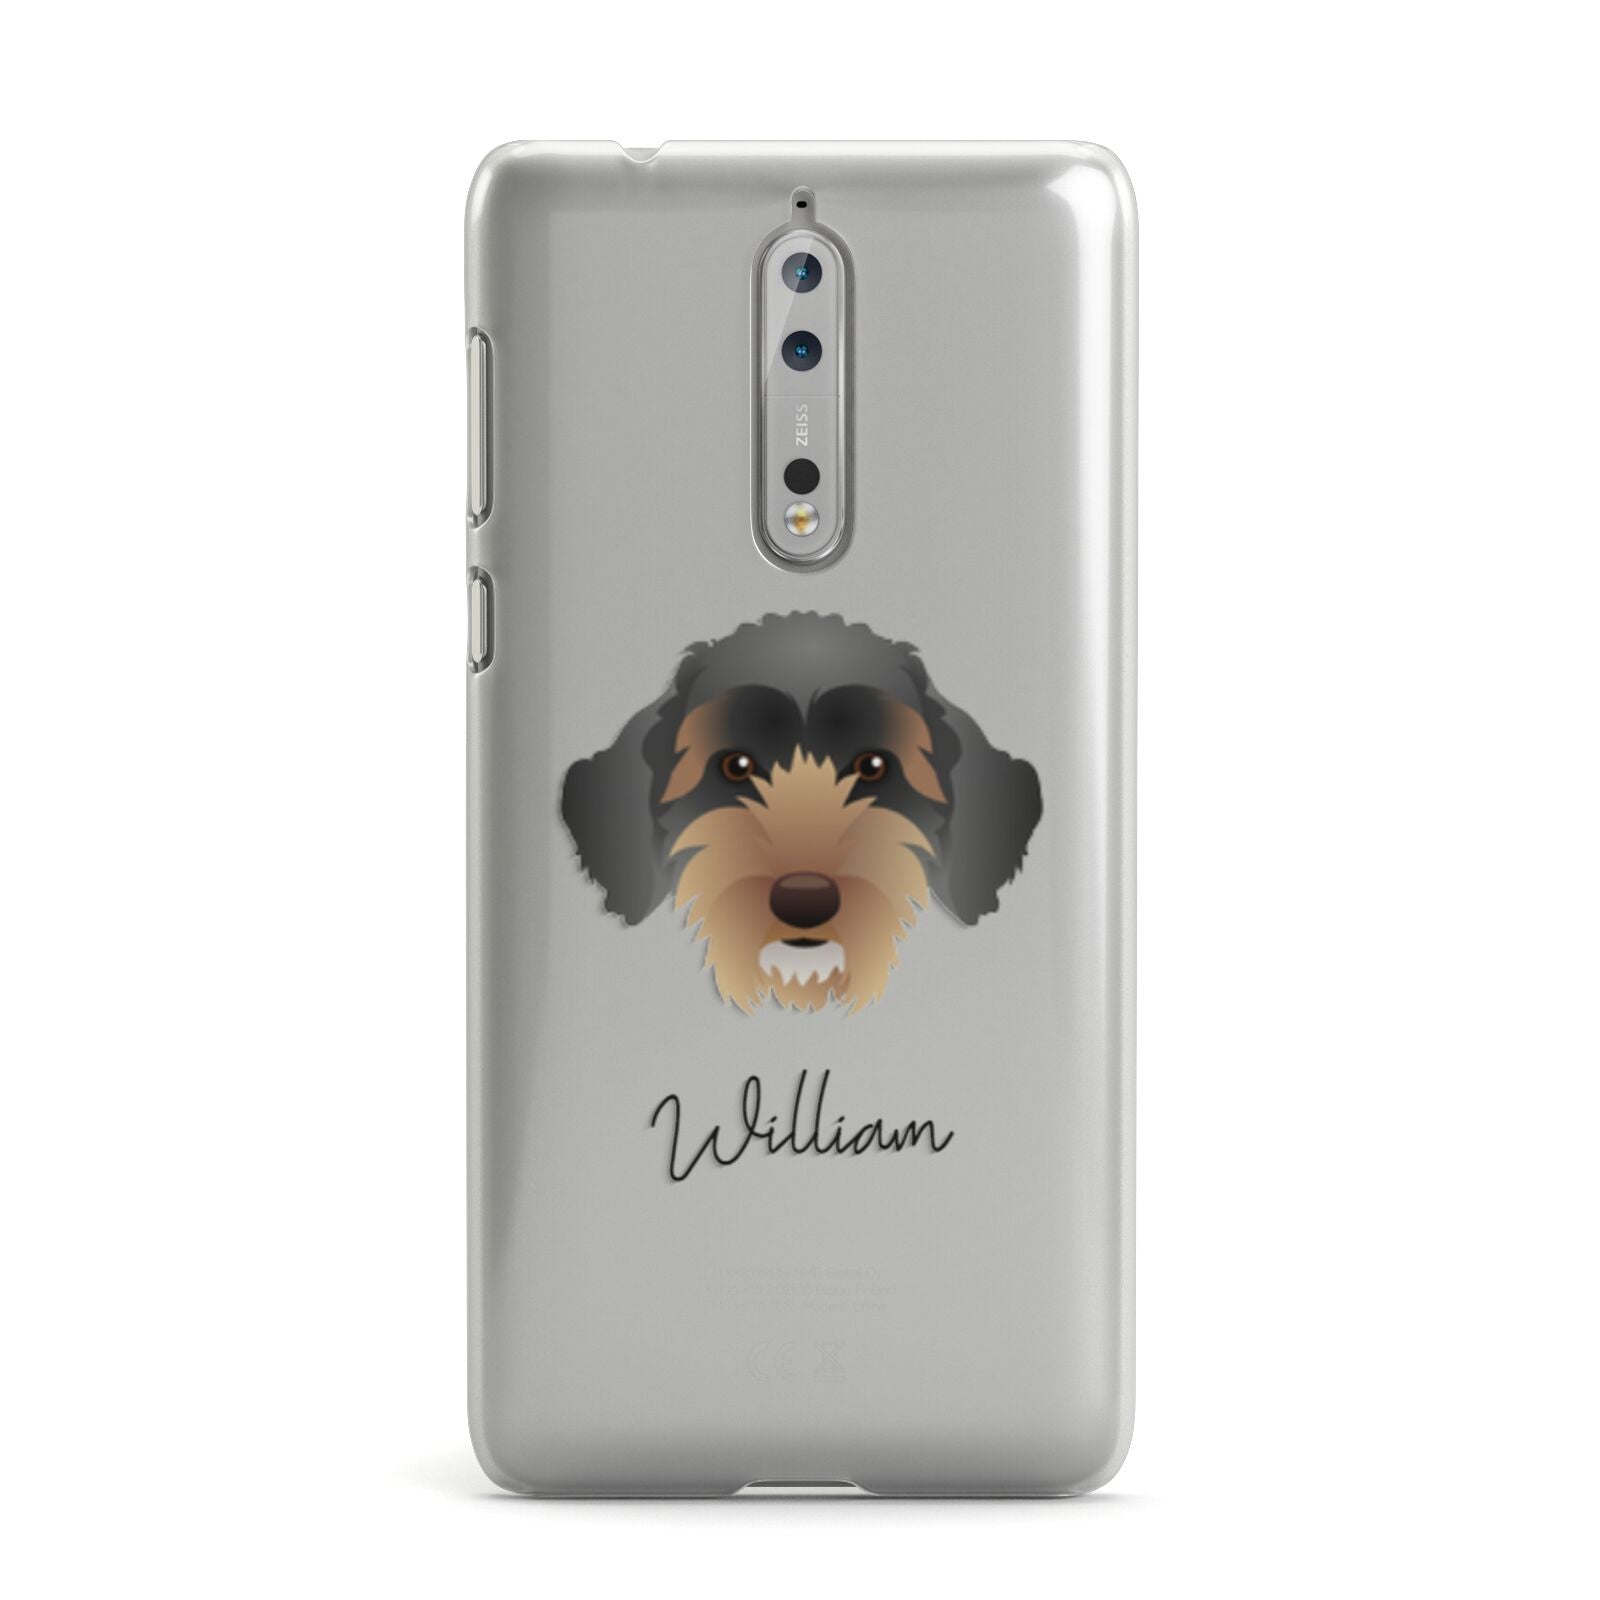 Sproodle Personalised Nokia Case